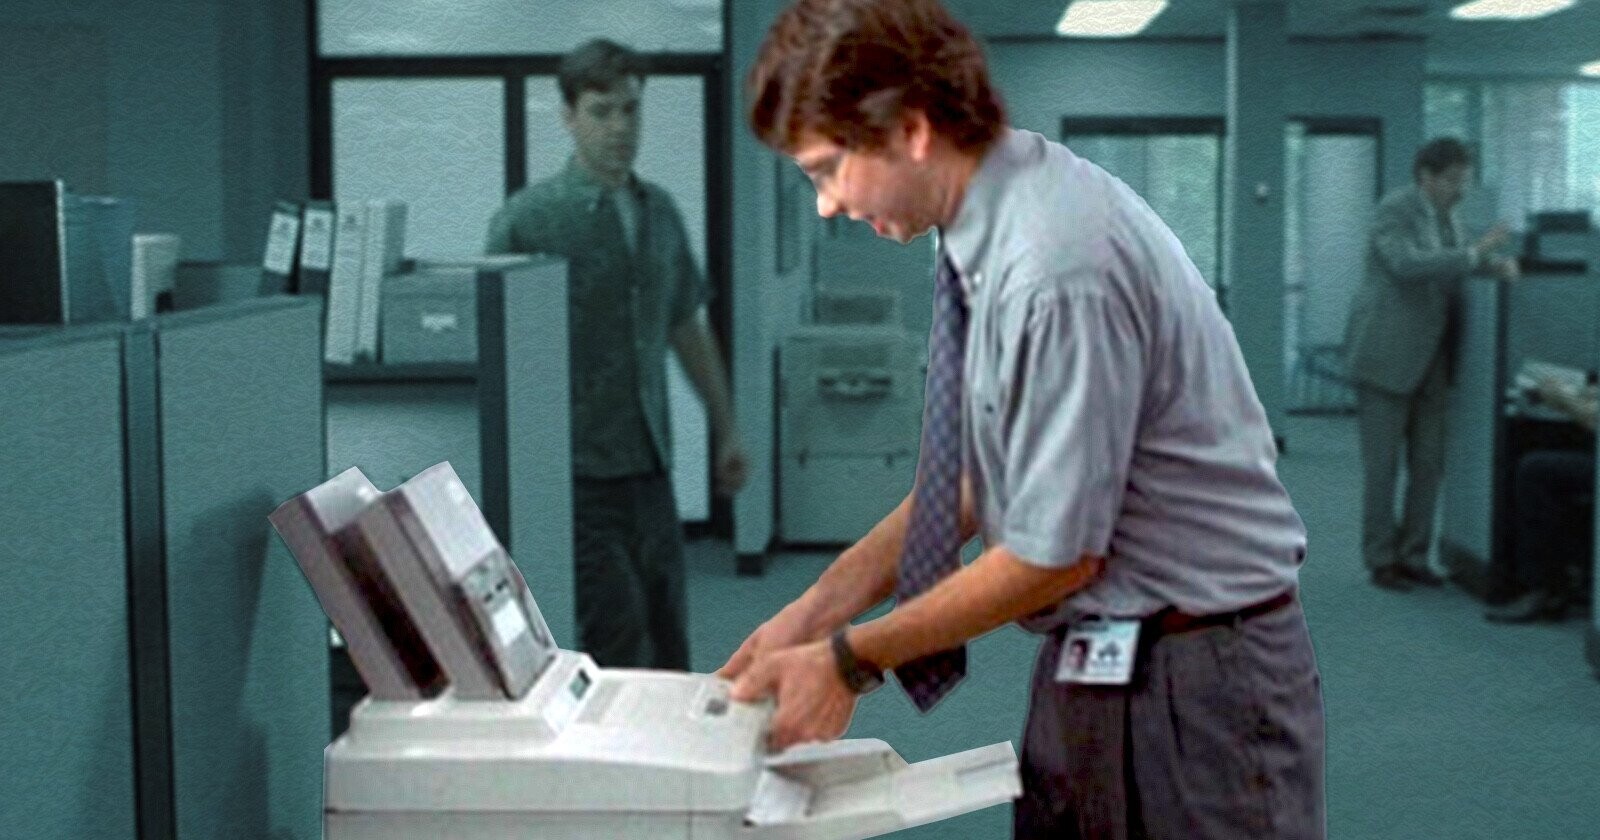 An IT Expert Explains What Was Wrong with the Printer from ‘Office Space’